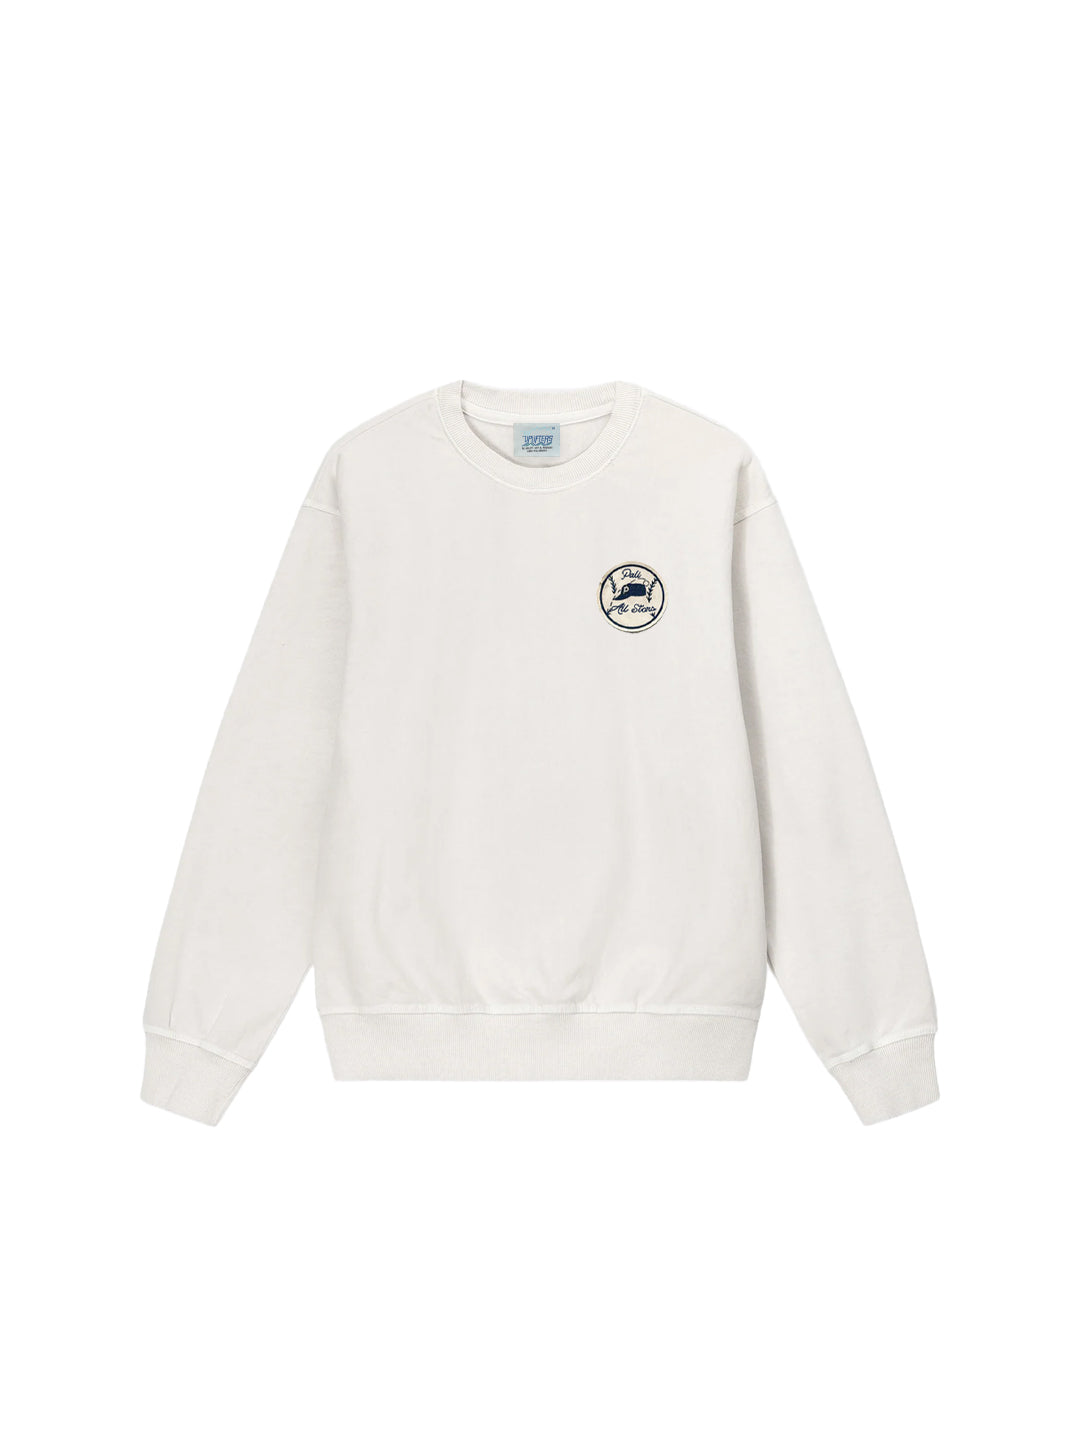 All Stars Patch Pullover Crewneck